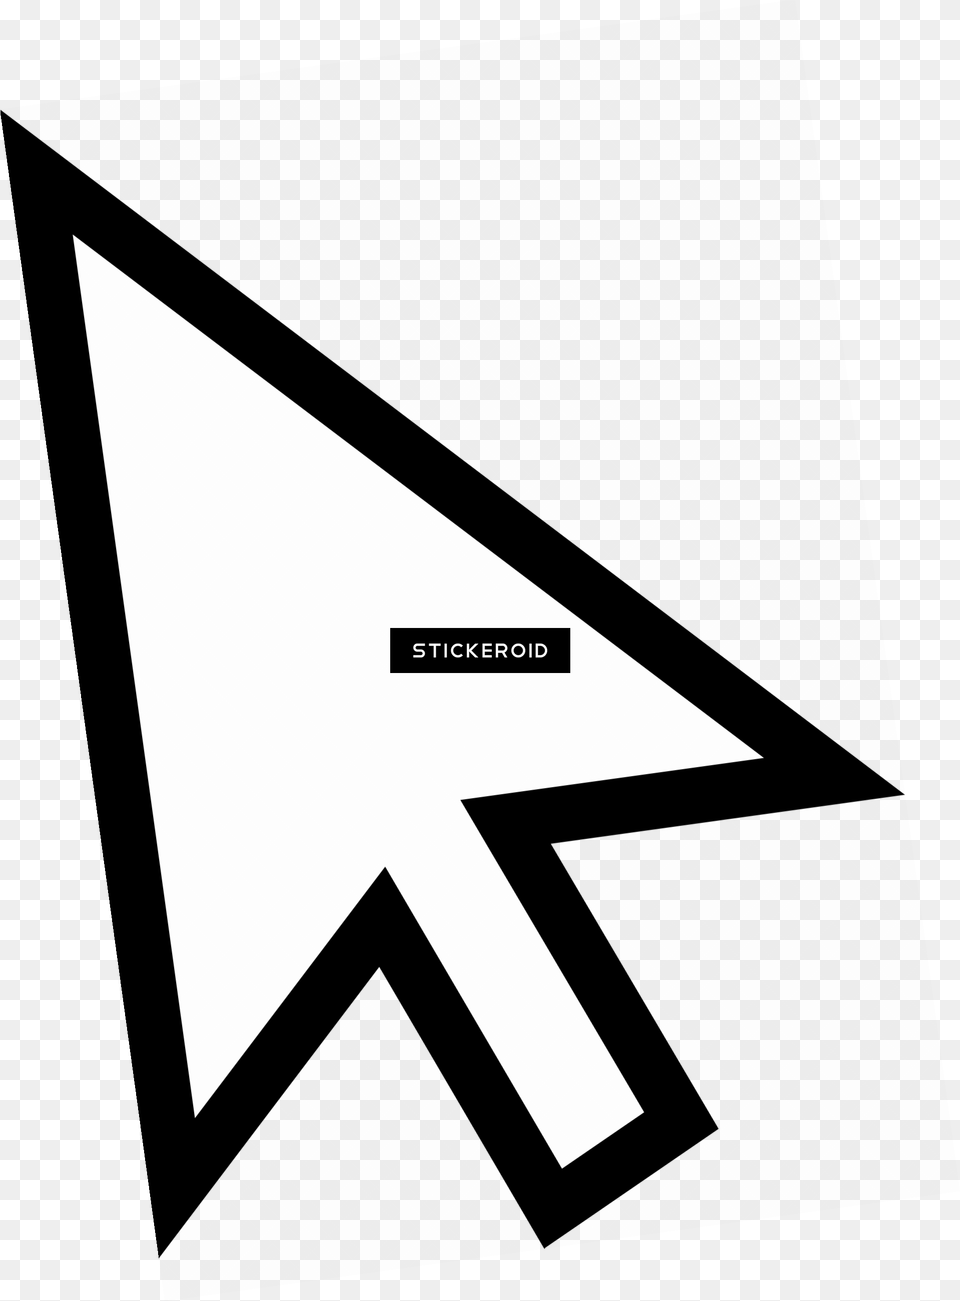 Hd White Mouse Cursor Arrow By Qubodup Icon Arrow Vector Click Icon, Triangle, Weapon, Arrowhead Free Transparent Png